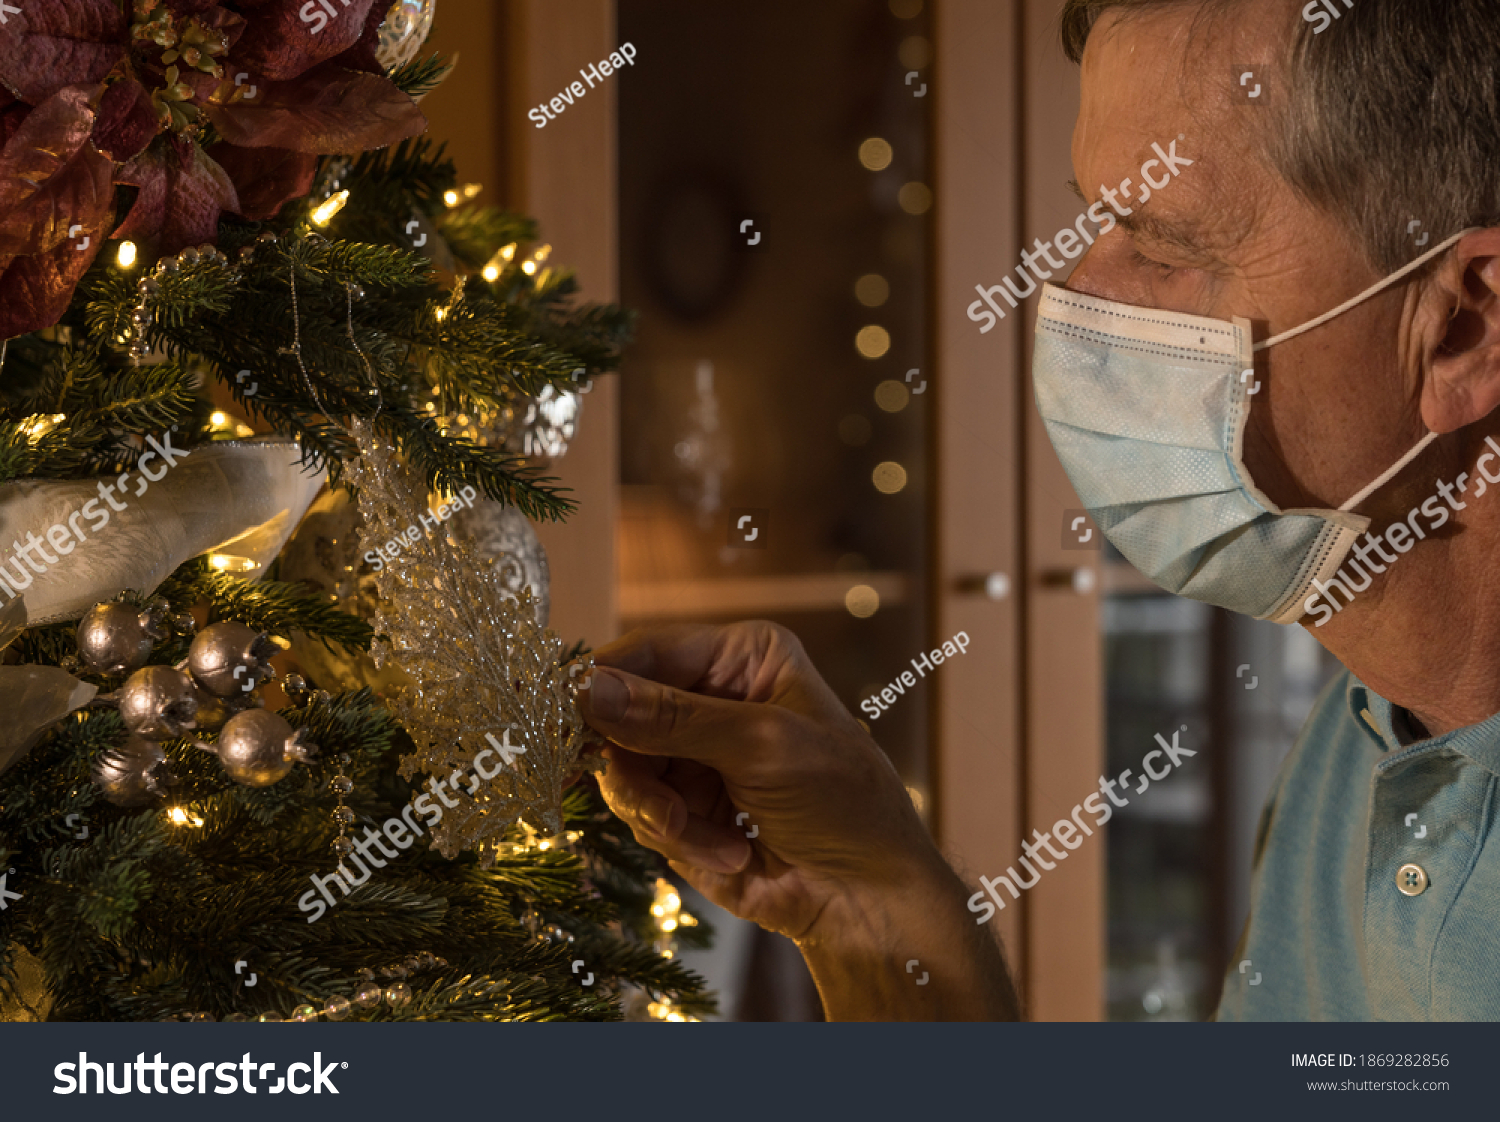 Senior lonely man with facemask looks at a lit christmas tree and recalls happier times before the pandemic